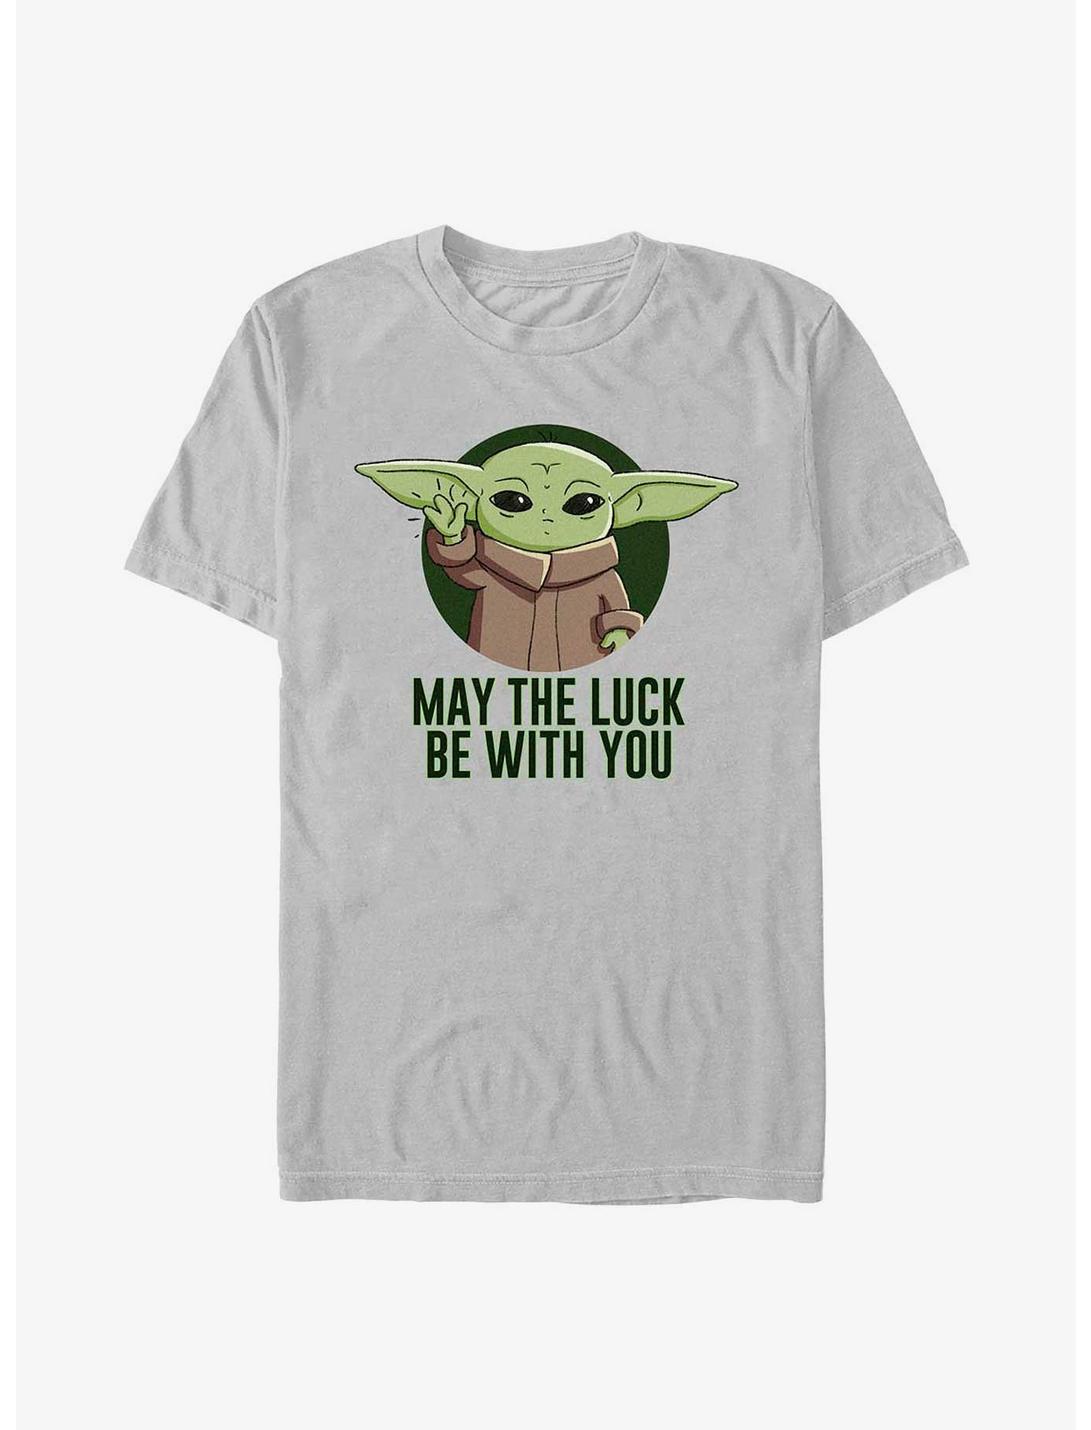 Star Wars The Mandalorian Grogu May The Luck Be With You T-Shirt, SILVER, hi-res